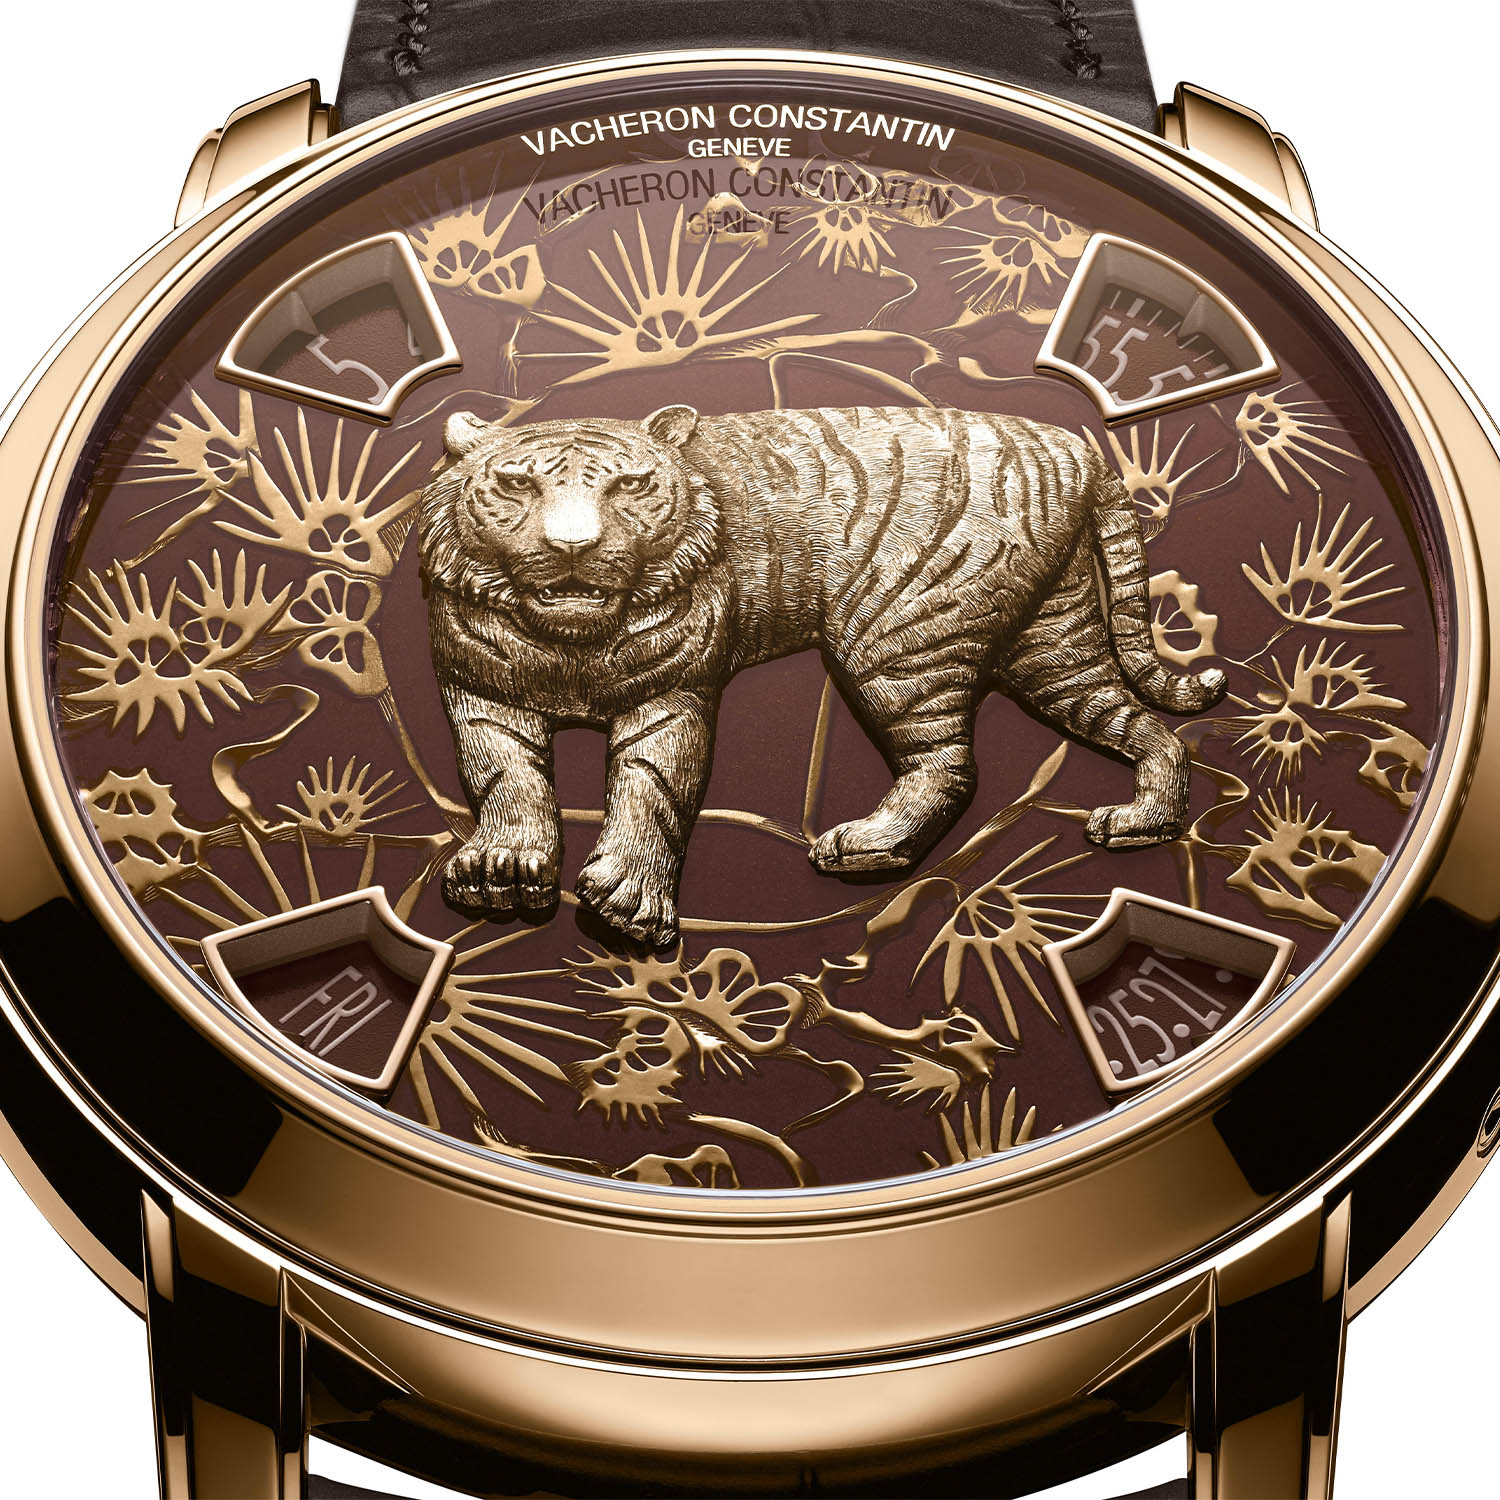 Vacheron Constantin Metiers d’Art The legend of the Chinese zodiac - Year of the tiger